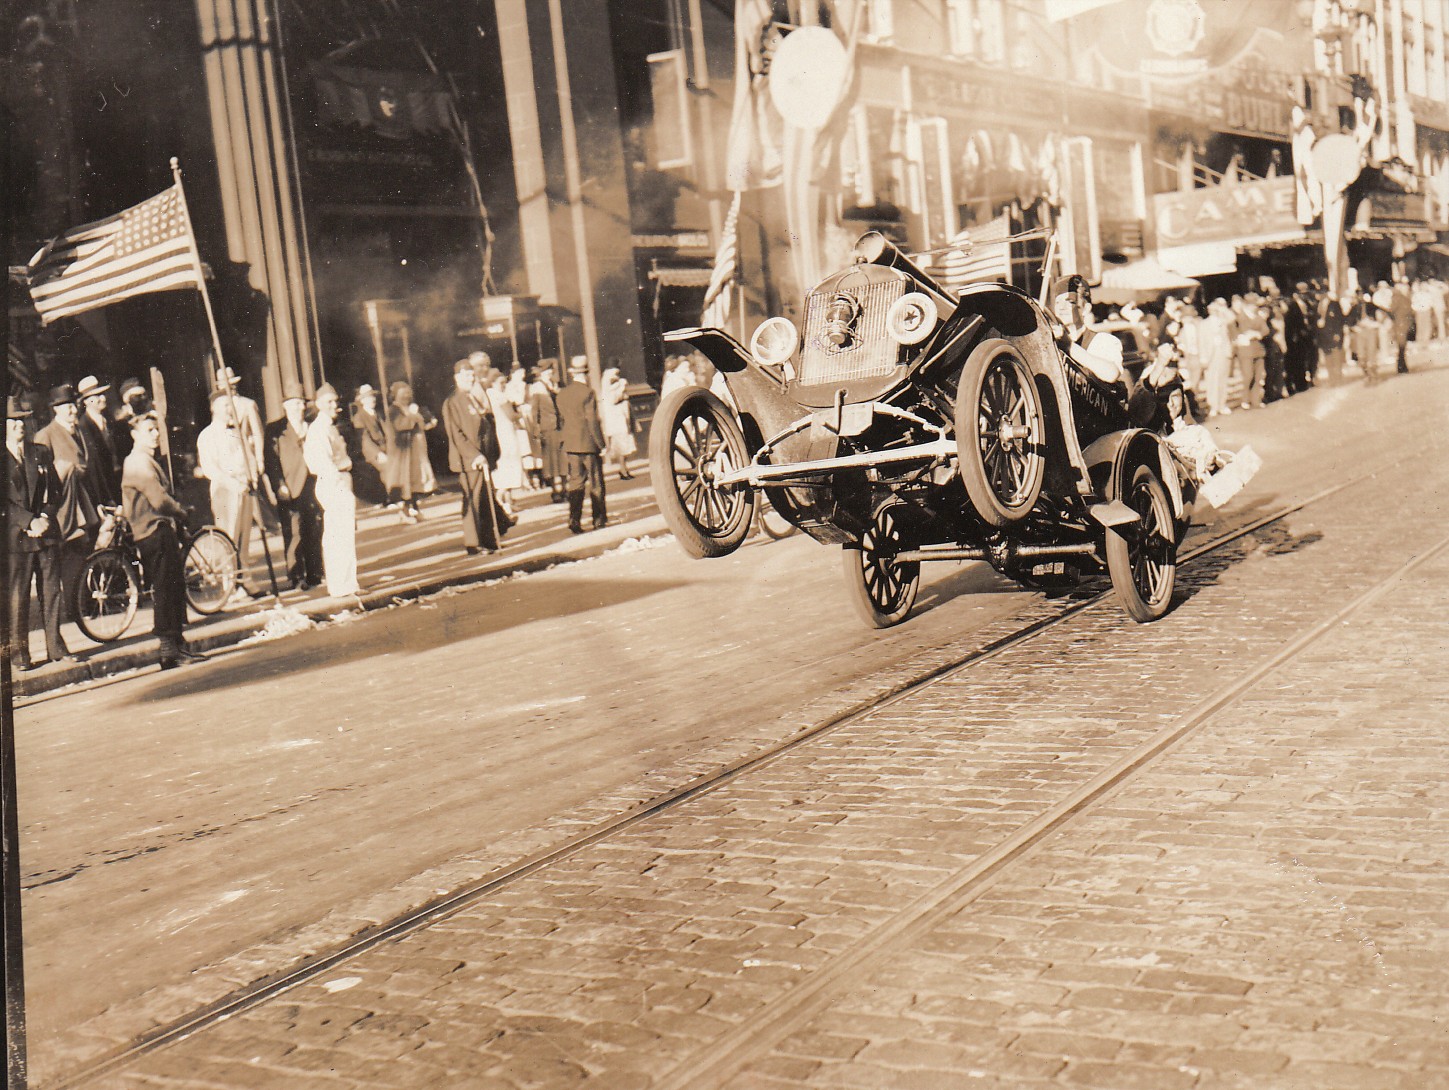 11. The world's first ever known wheelie to be successfully attempted, c. 1936.